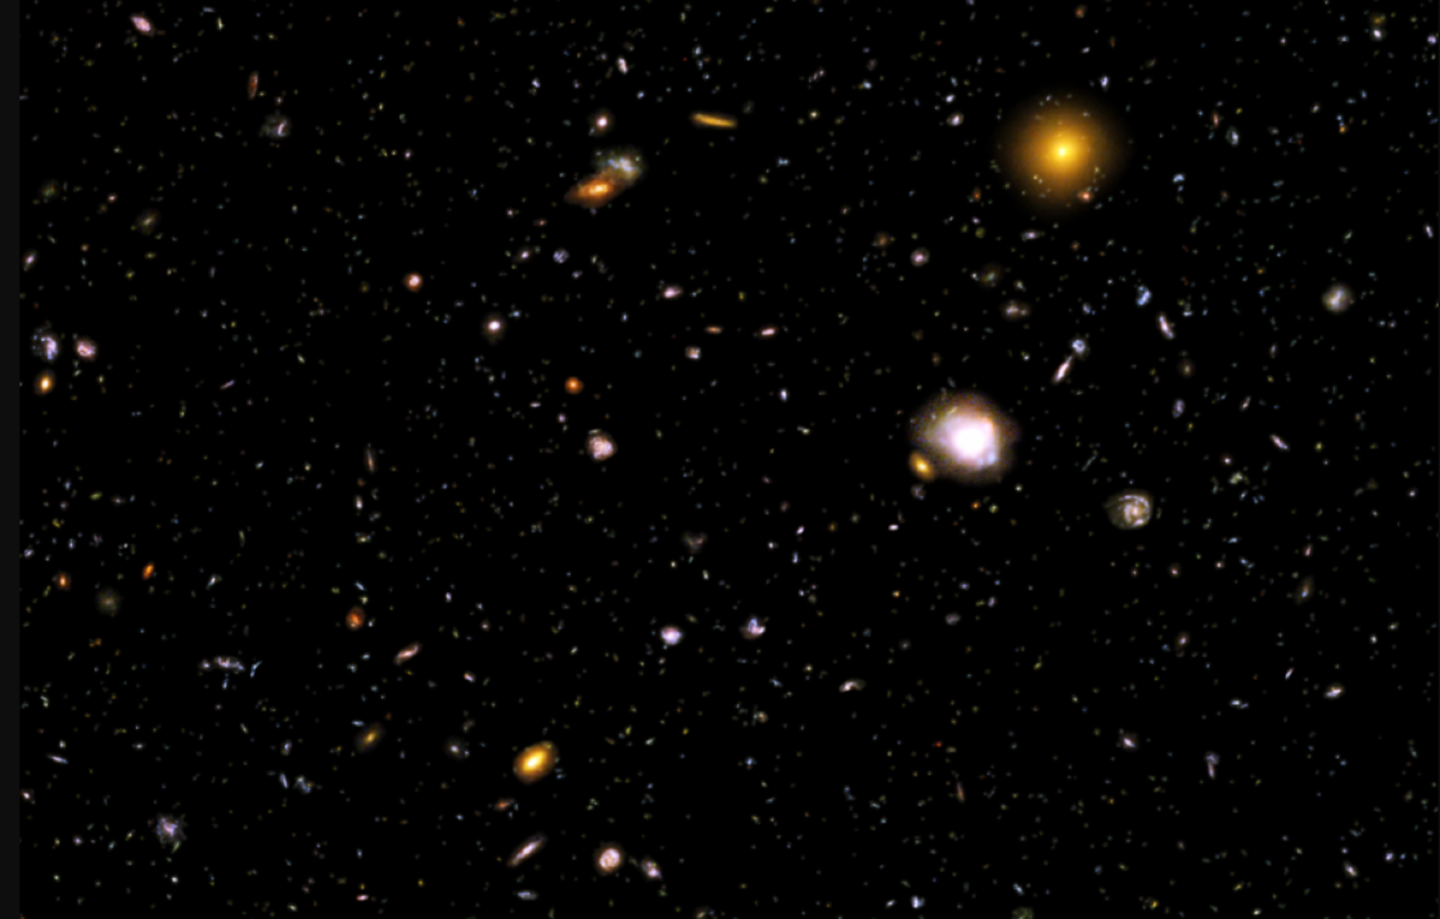 Hubble space telescope deep field view of ancient galaxies that helps answer the question: How old is the universe?